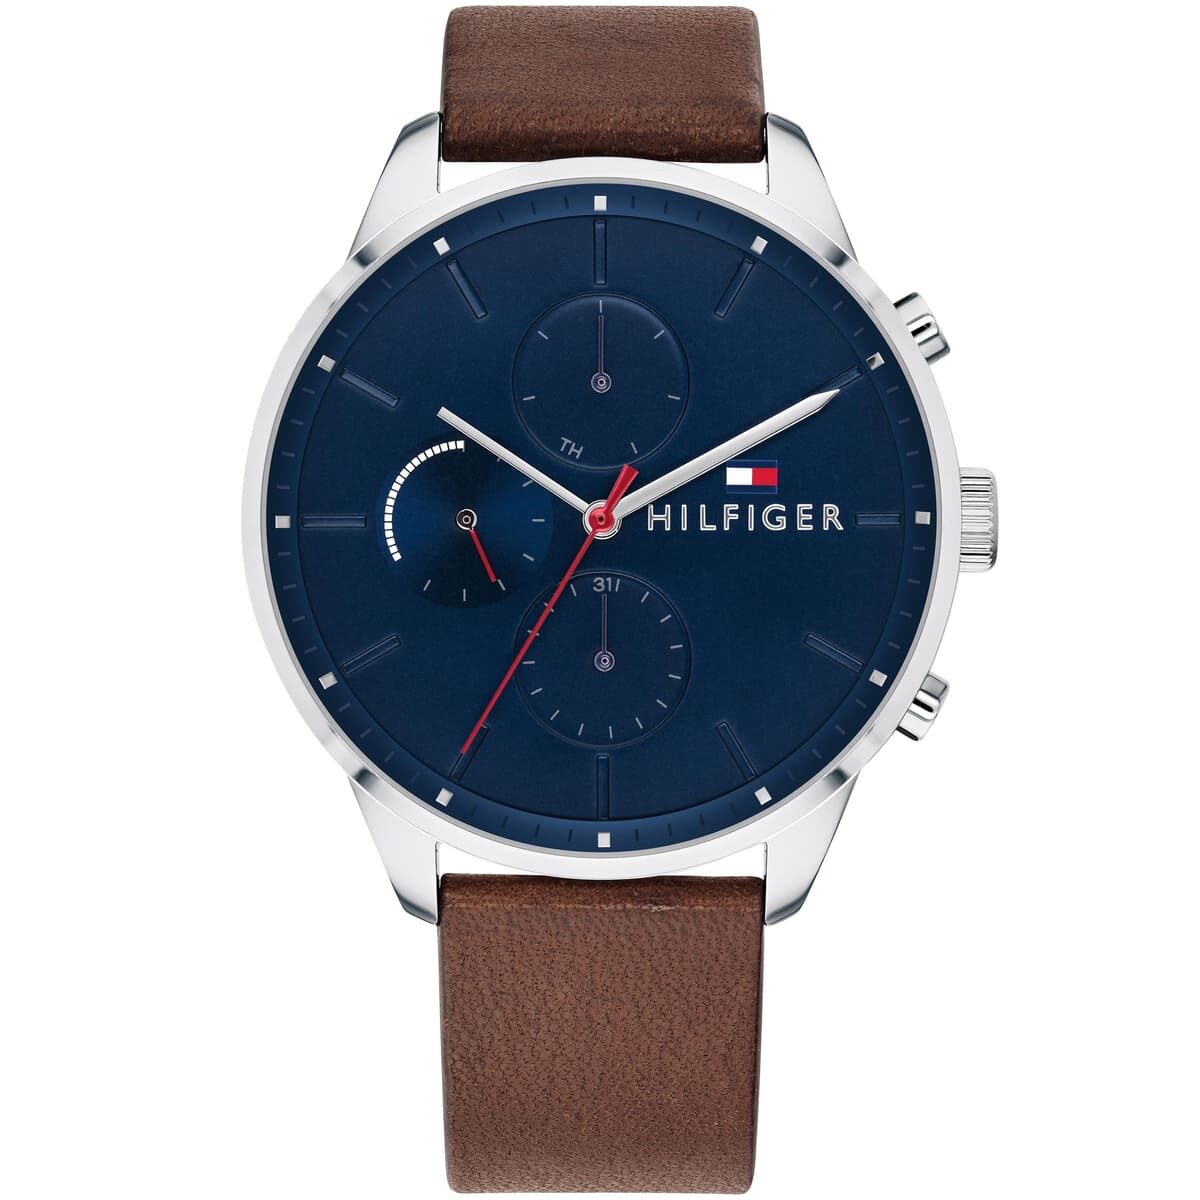 1791487-tommy-hilfiger-watch-men-blue-dial-leather-brown-strap-quartz-analog-day-date-month-chase